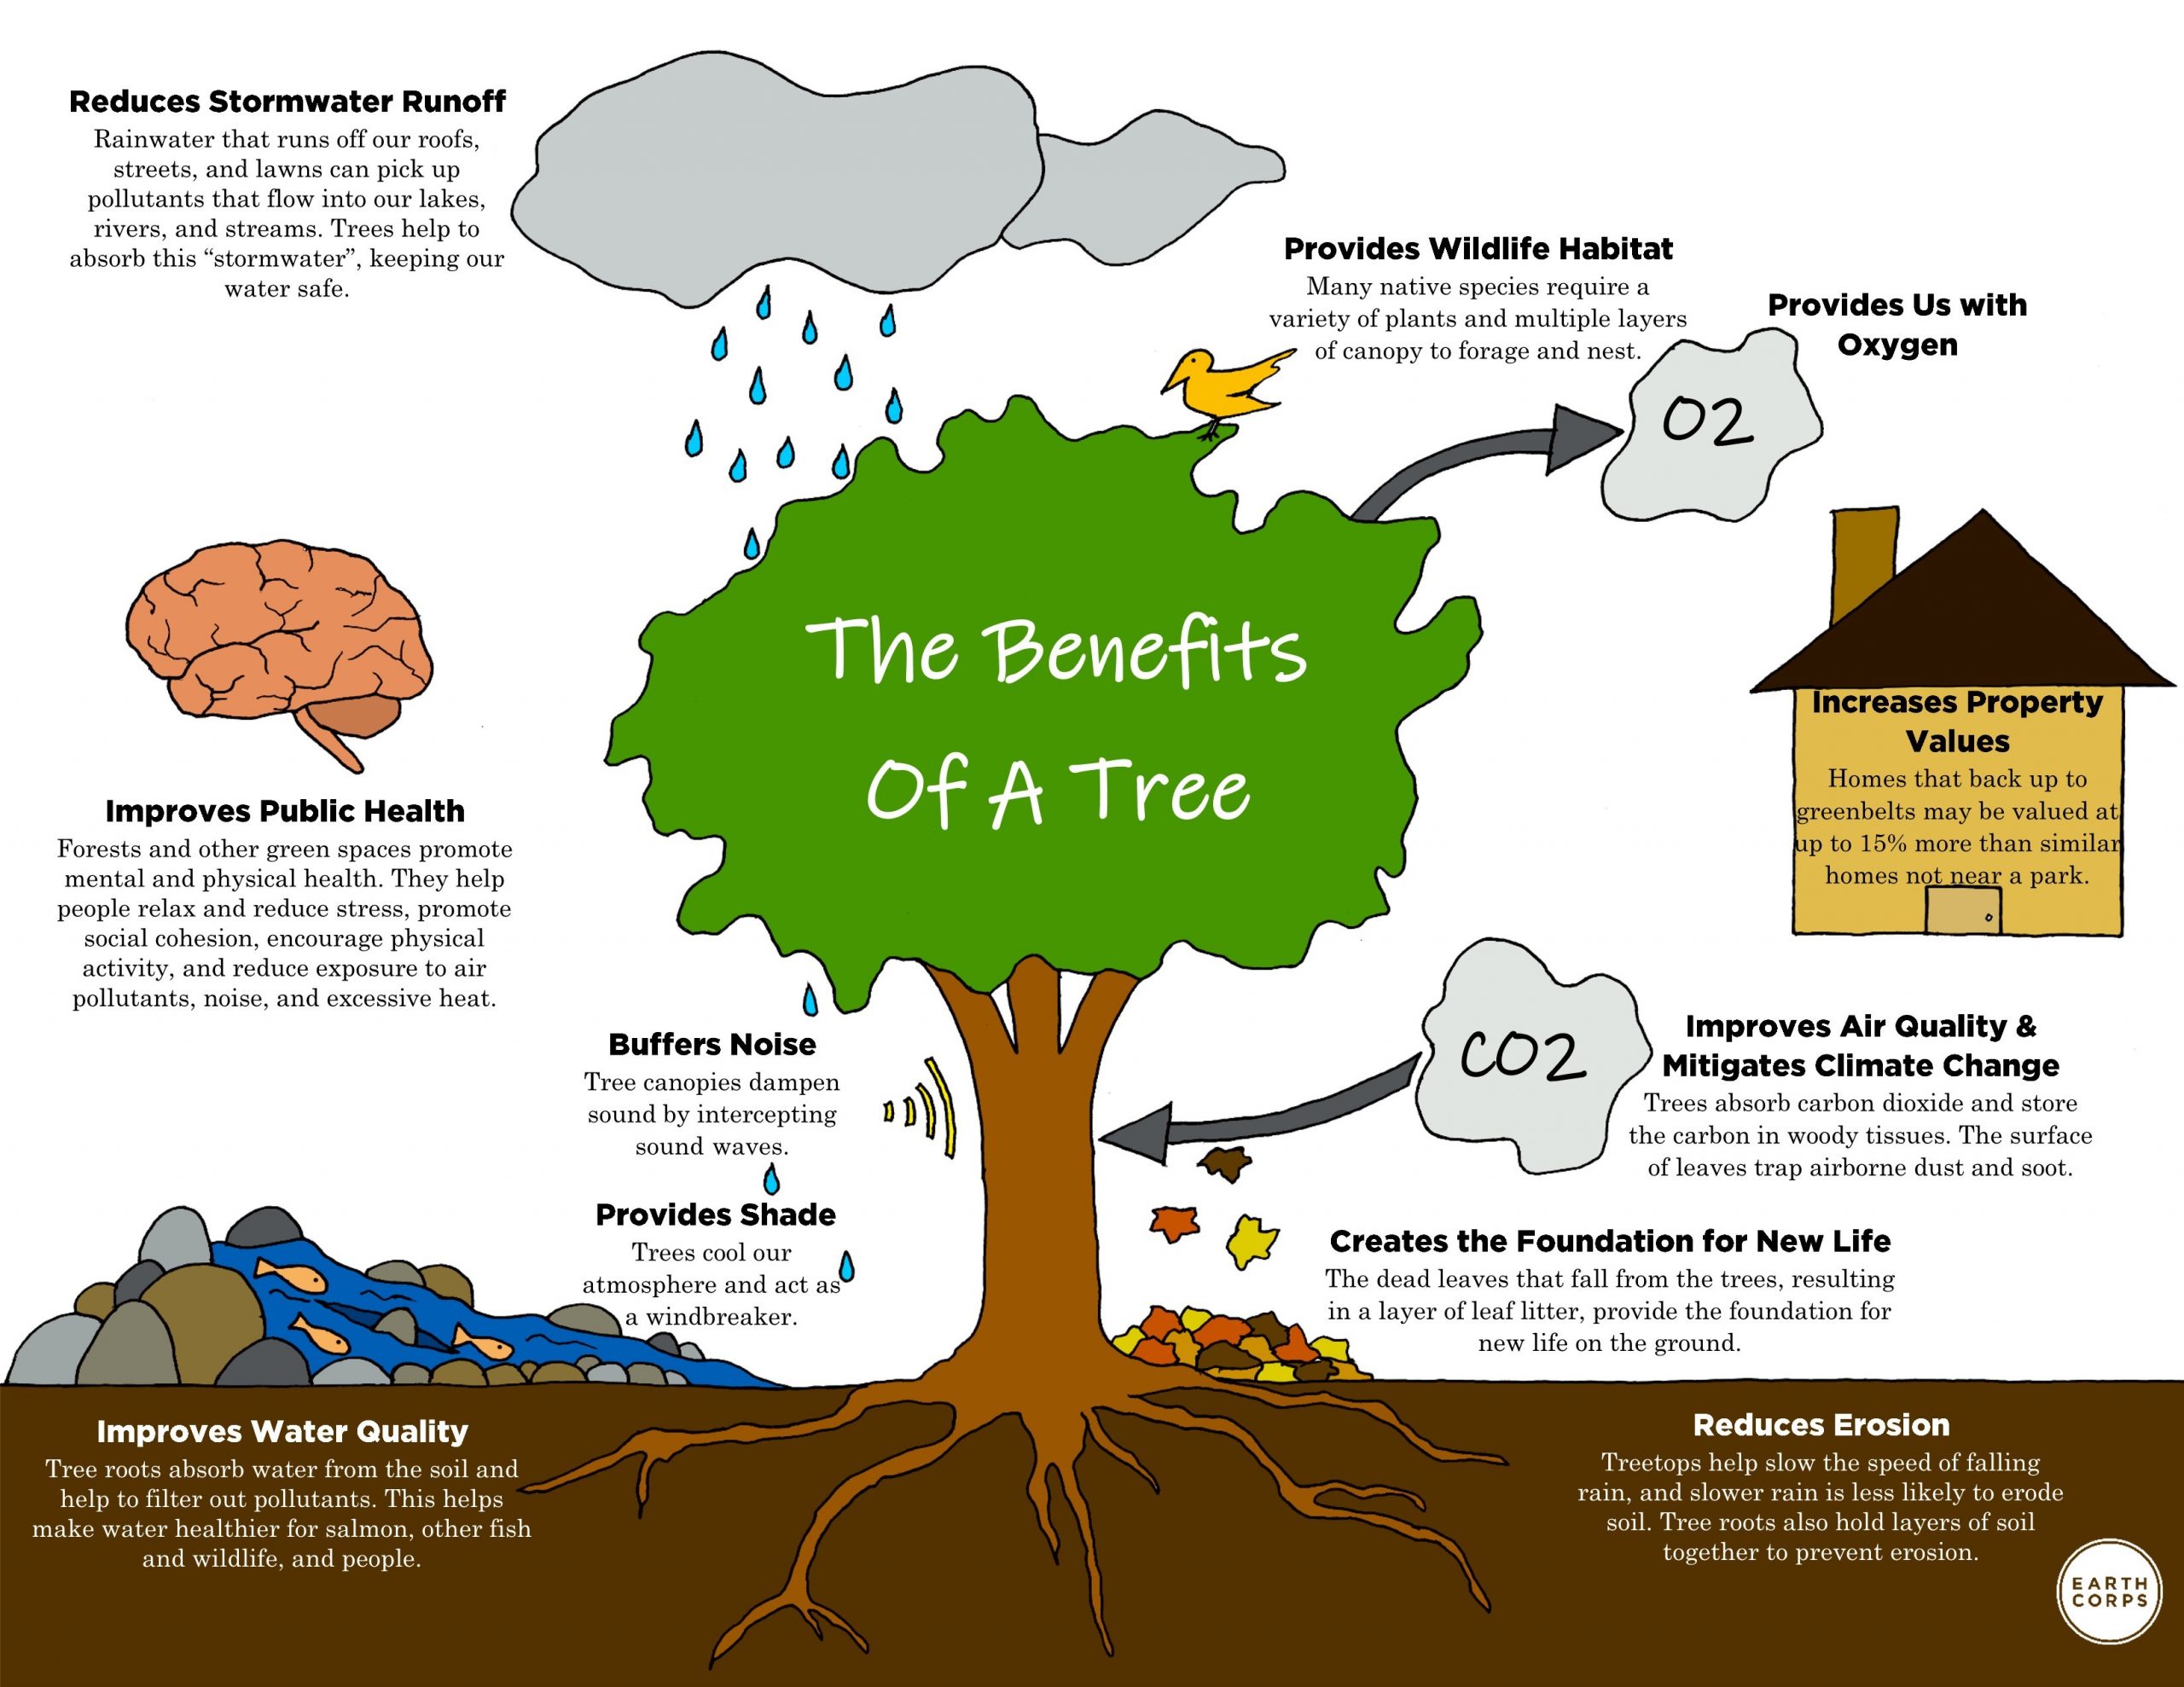 The Benefits of A Tree infographic. Infographic of the benefits of a tree. The graphic shows a green tree in the middle, with graphics all around the tree showing the various benefits. These graphics include; a house that reads, increases property values, and text next to the house that reads, makes communities more attractive, a brain that reads, improves public health, a cloud with rain that reads, reduces stormwater runoff, a bird on the tree with text that reads, provides wildlife habitat, an arrow pointing to a cloud with the text O2 that reads, provides us with oxygen, an arrow pointing to the tree trunk coming from a cloud with the text Co2 that reads, improves air quality and mitigates climate change, lines to show noise next to the tree trunk with text that reads, buffers noise, stream of water and rocks with fish with the text that reads improves water quality, fall colored leaves falling from the tree with text that reads, creates the foundation for new life, under the tree there is text that reads, provides shade and cooling, and words at the bottom of the tree that reads, reduces erosion. Image caption below. 